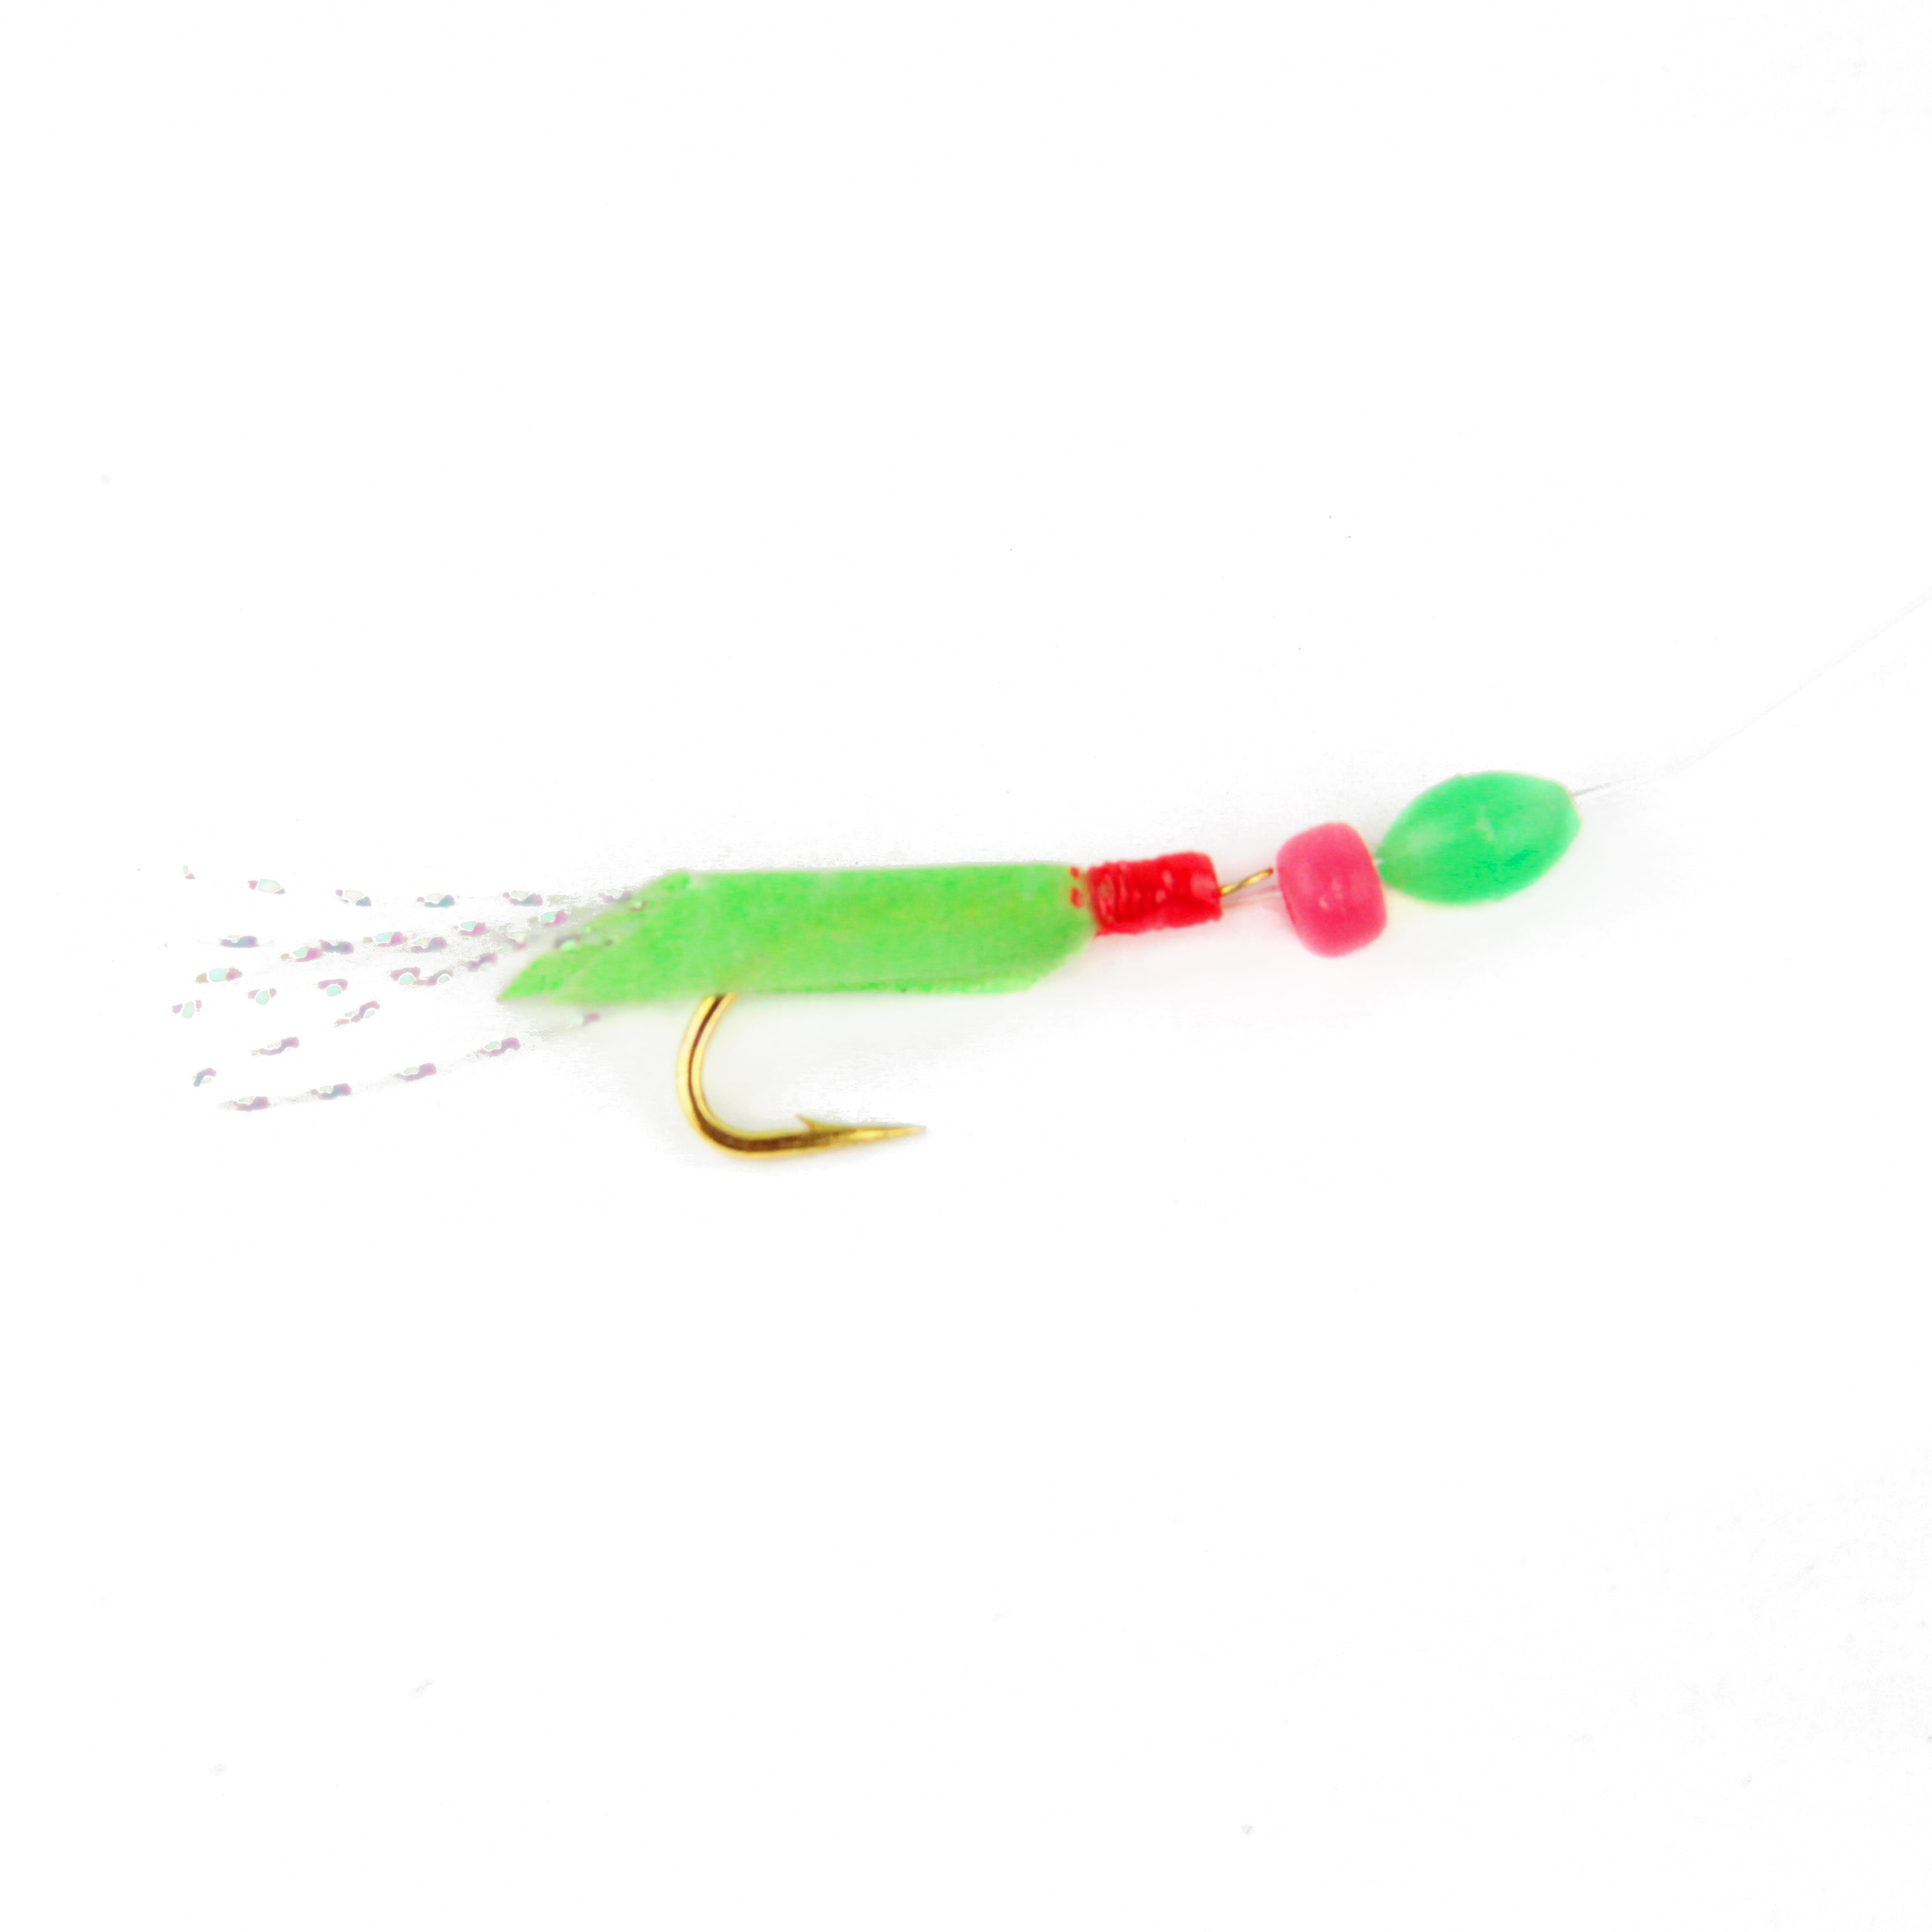 20 Packs Size #6 Sabiki Bait Rigs 6 Hooks Red feather Offshore Saltwater Lures 